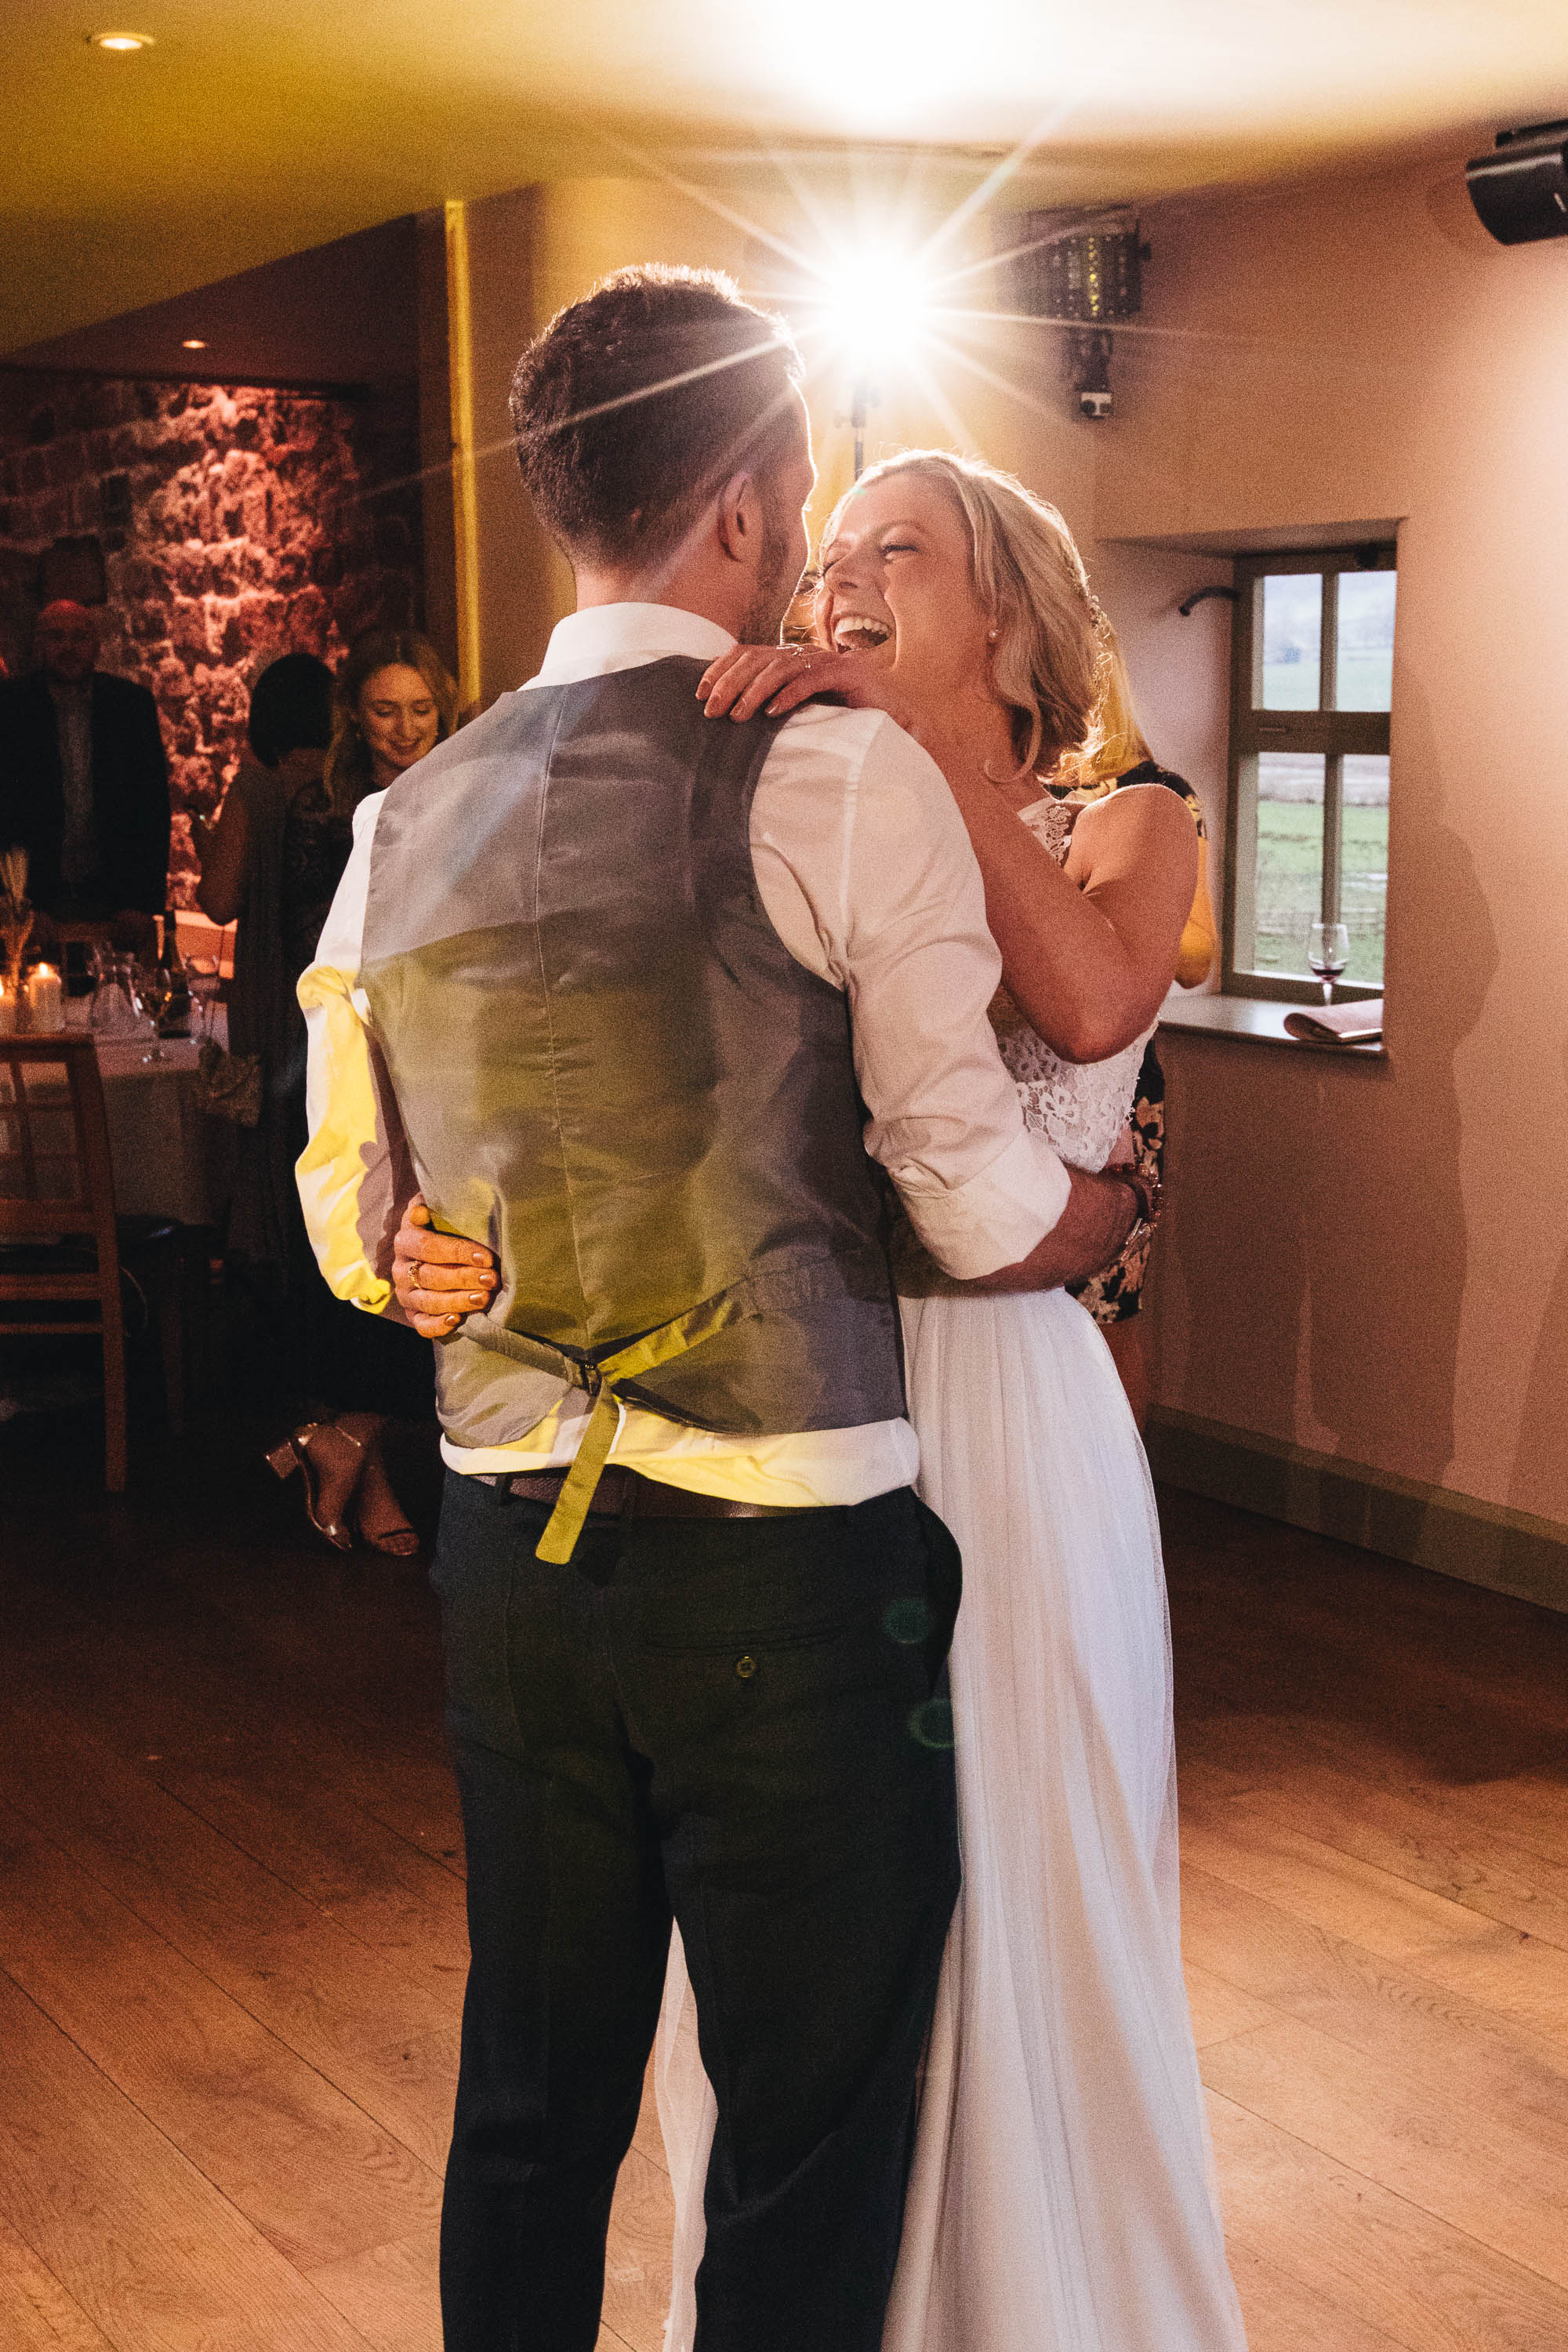 Bride laughs as the Groom holds her closer during first dance